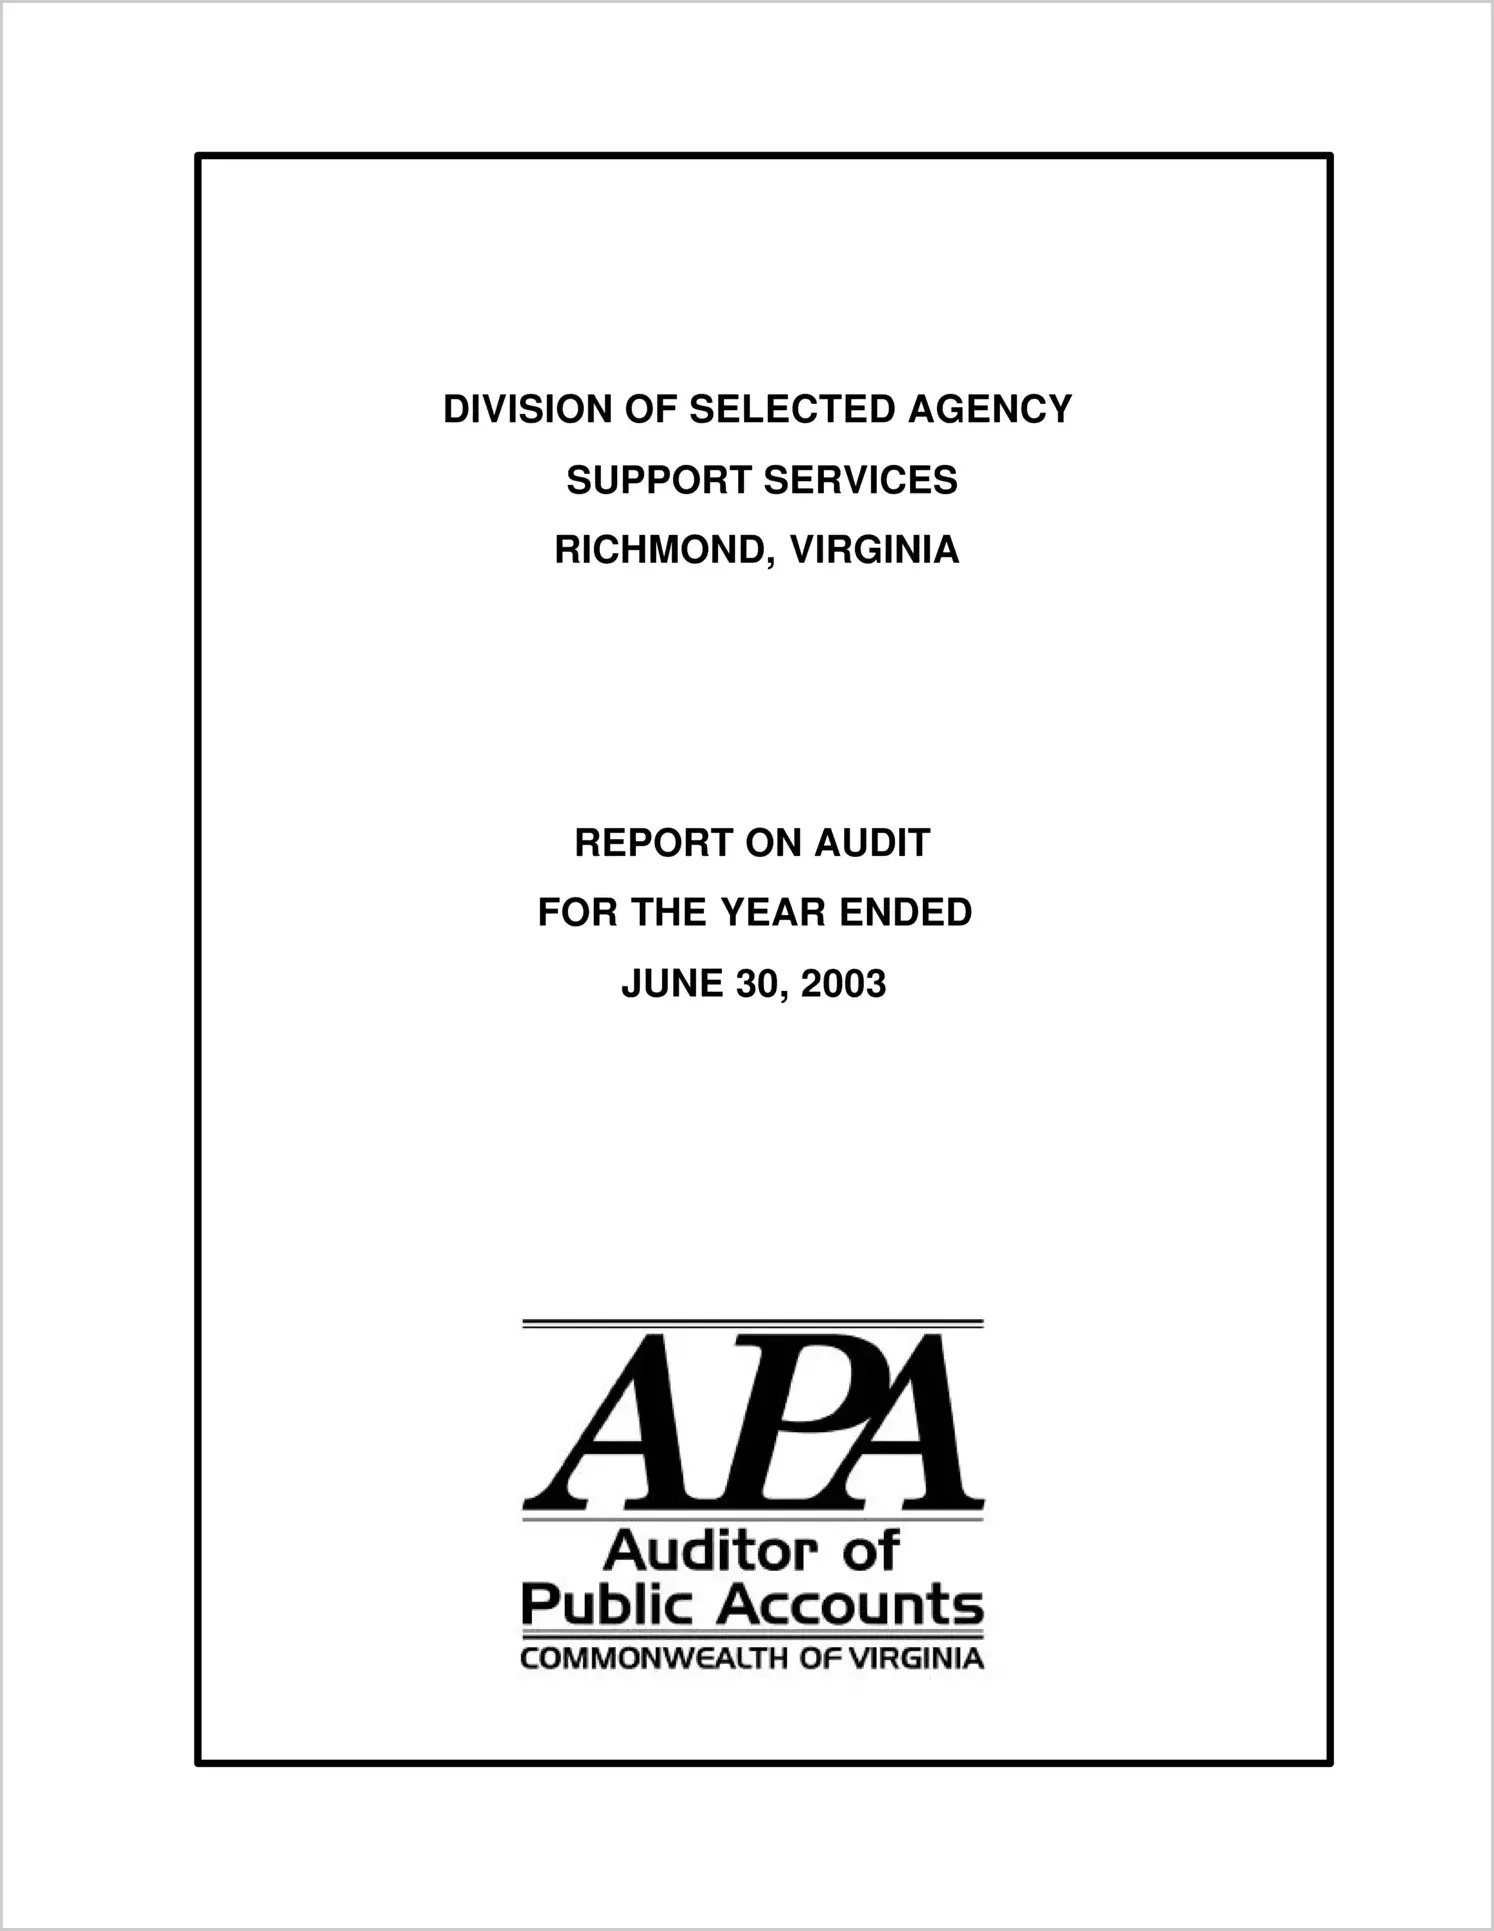 Division of Selected Agency Support Services for the year ended June 30, 2003